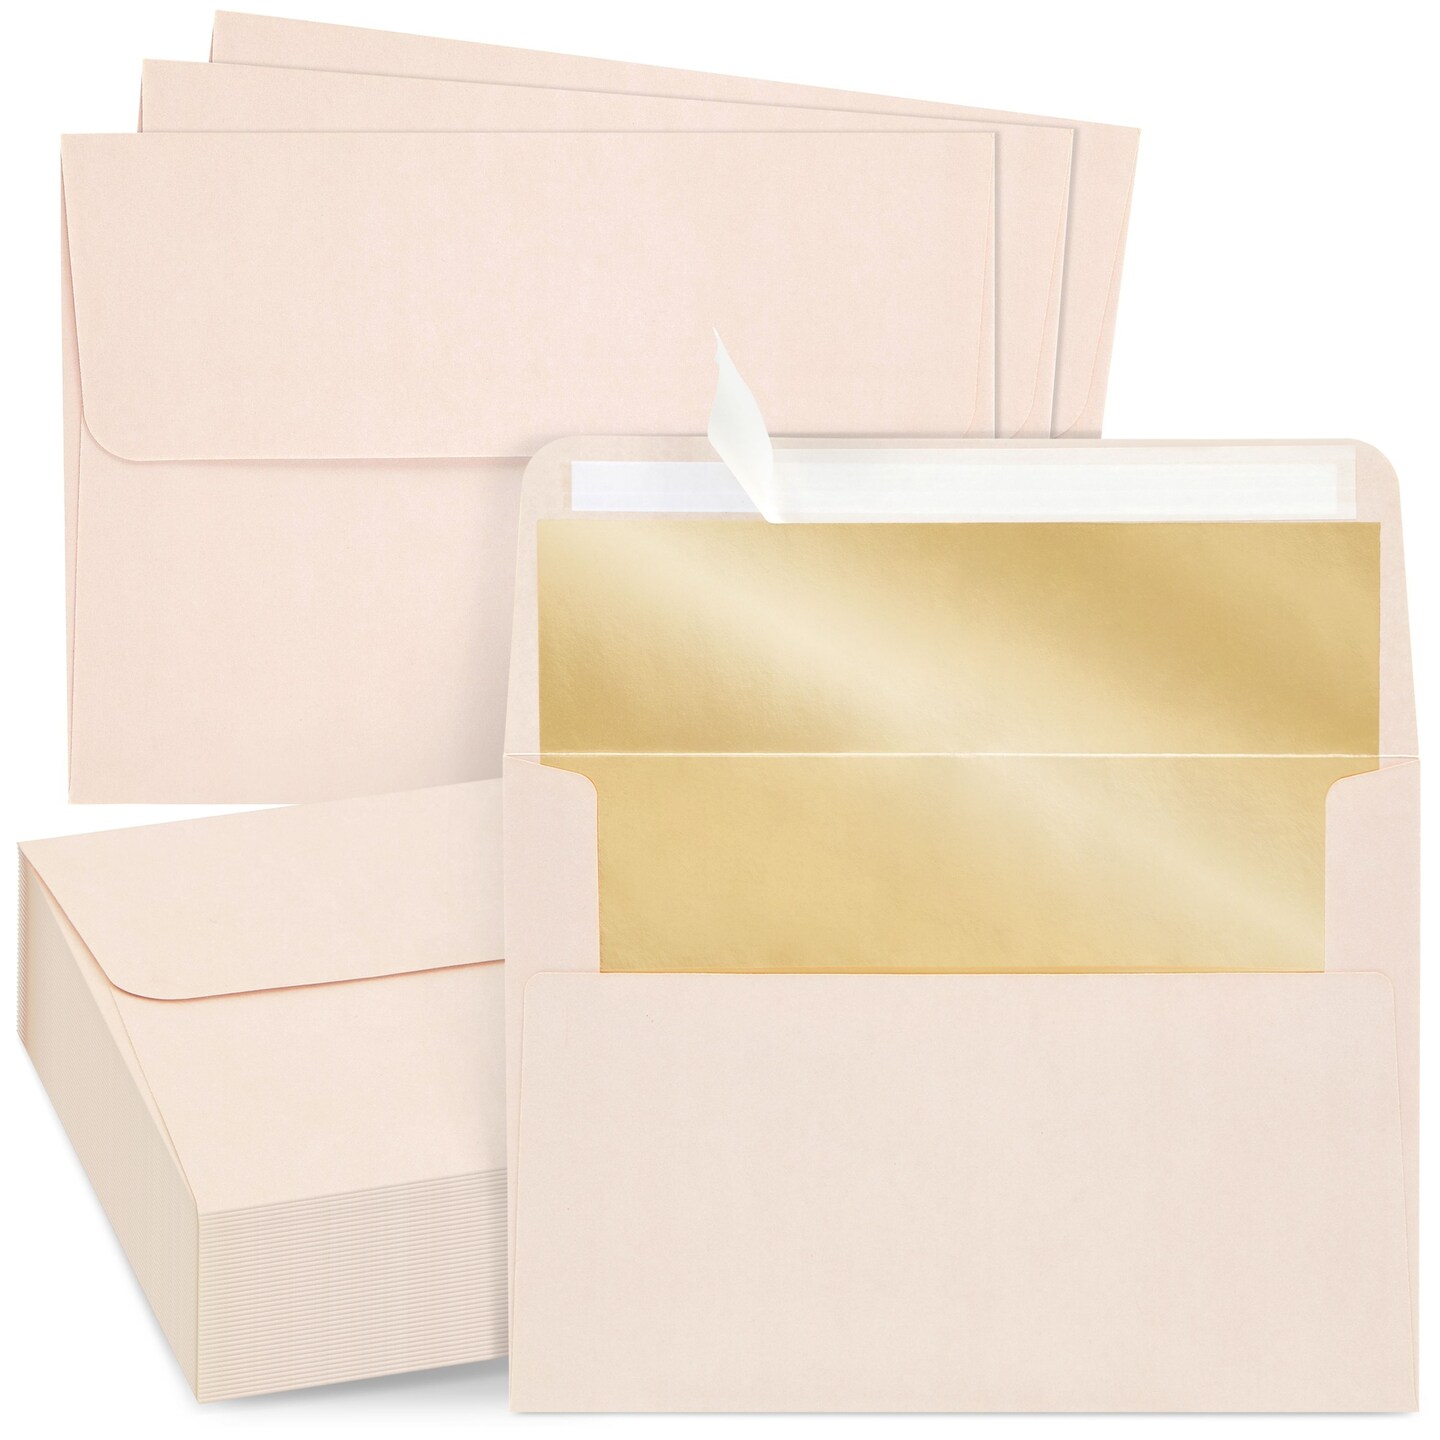 50 Pack Blush Pink 5x7 Envelopes for Invitations, Wedding, A7 Size with Bronze Lining and Self Adhesive Peel and Stick